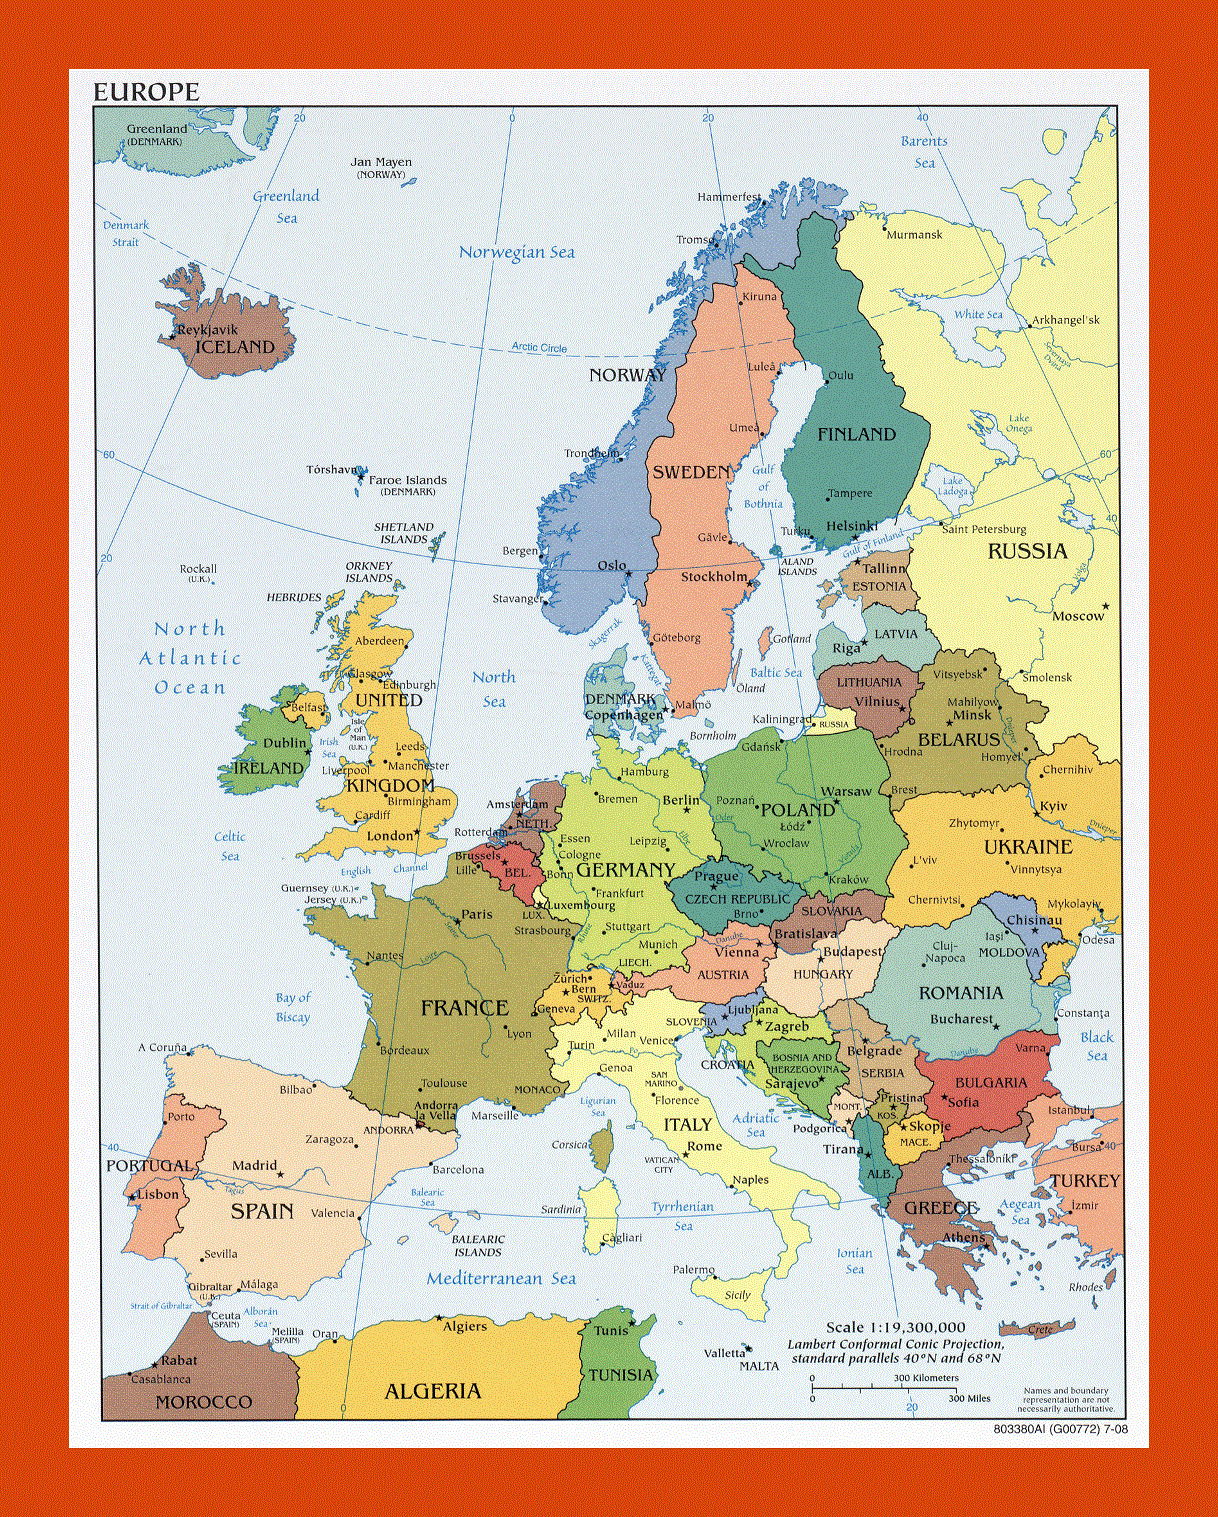 Political map of Europe - 2008